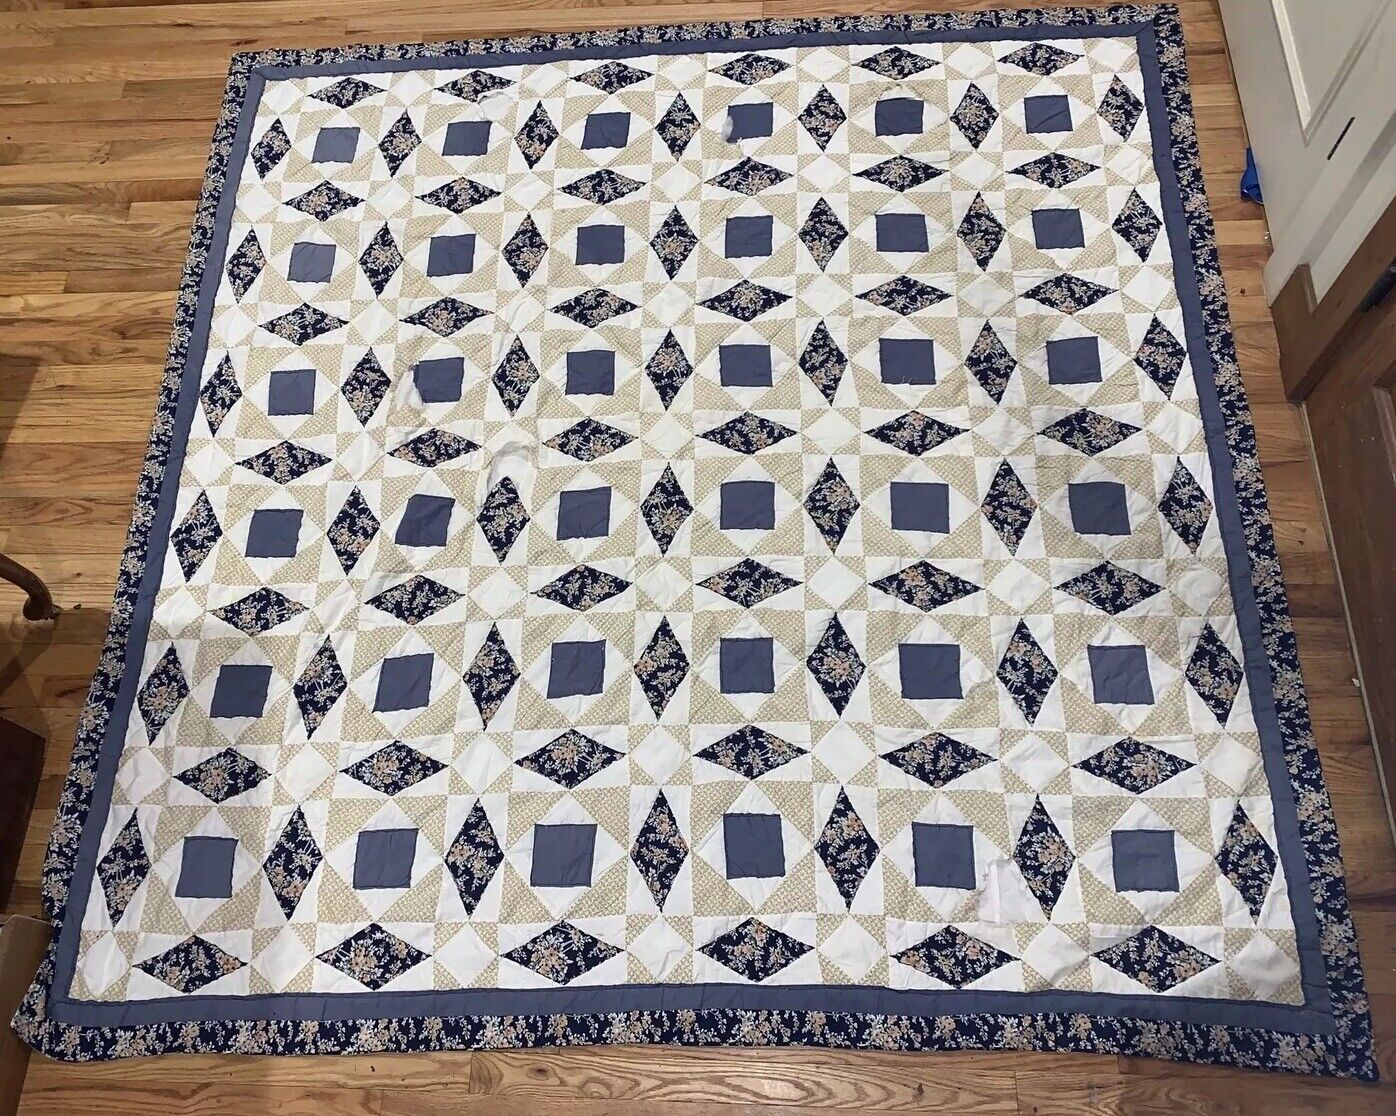 Handmade Double Wedding Ring Cotton Sewing Patchwork Quilt 78”x79”